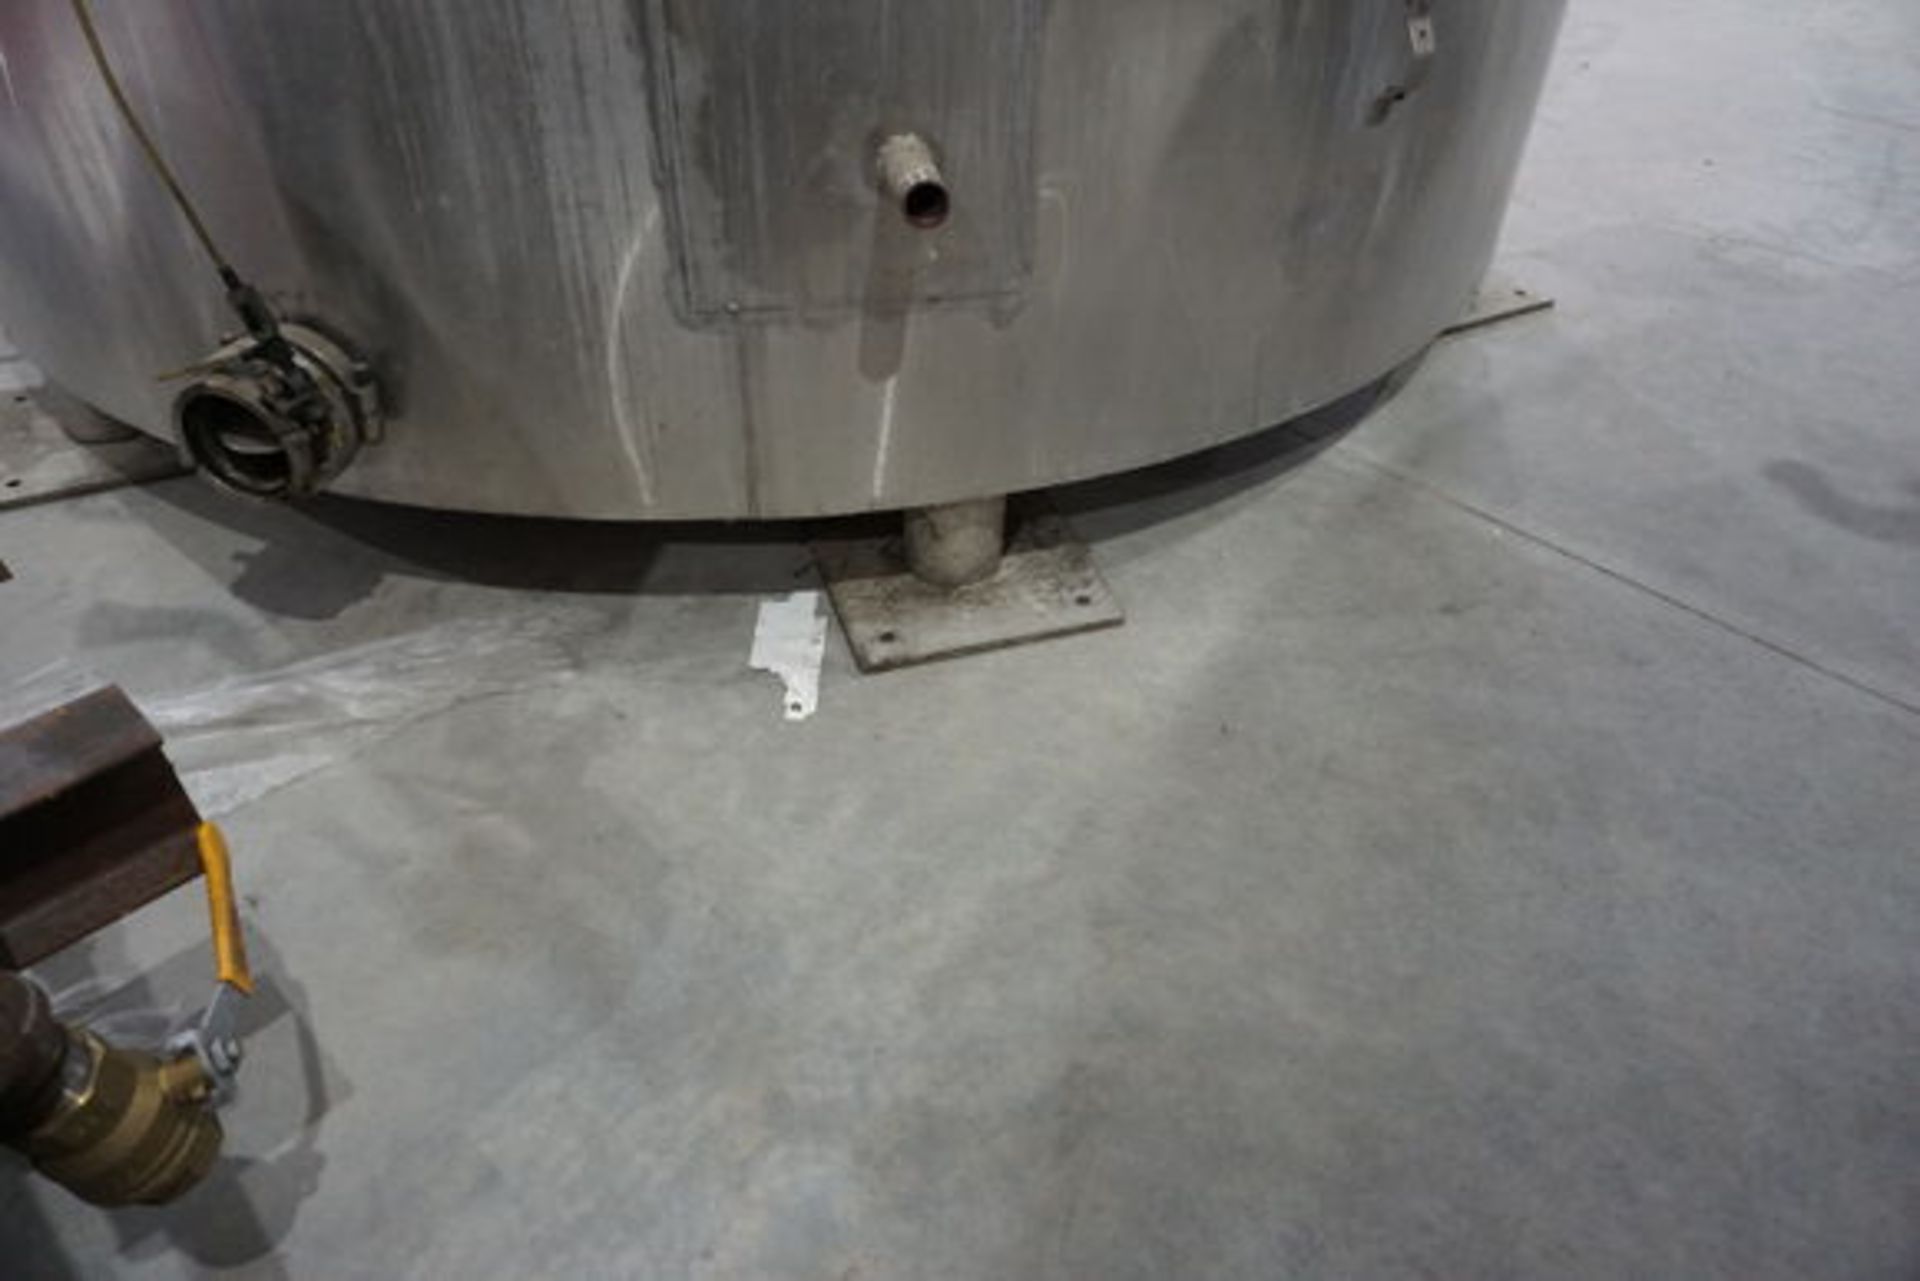 Stainless Steel Mixing Kettle/ Whirpool Tank, 59HL, 745 BBL Max Cap (LOCATION: ROME, TX) - Image 4 of 10